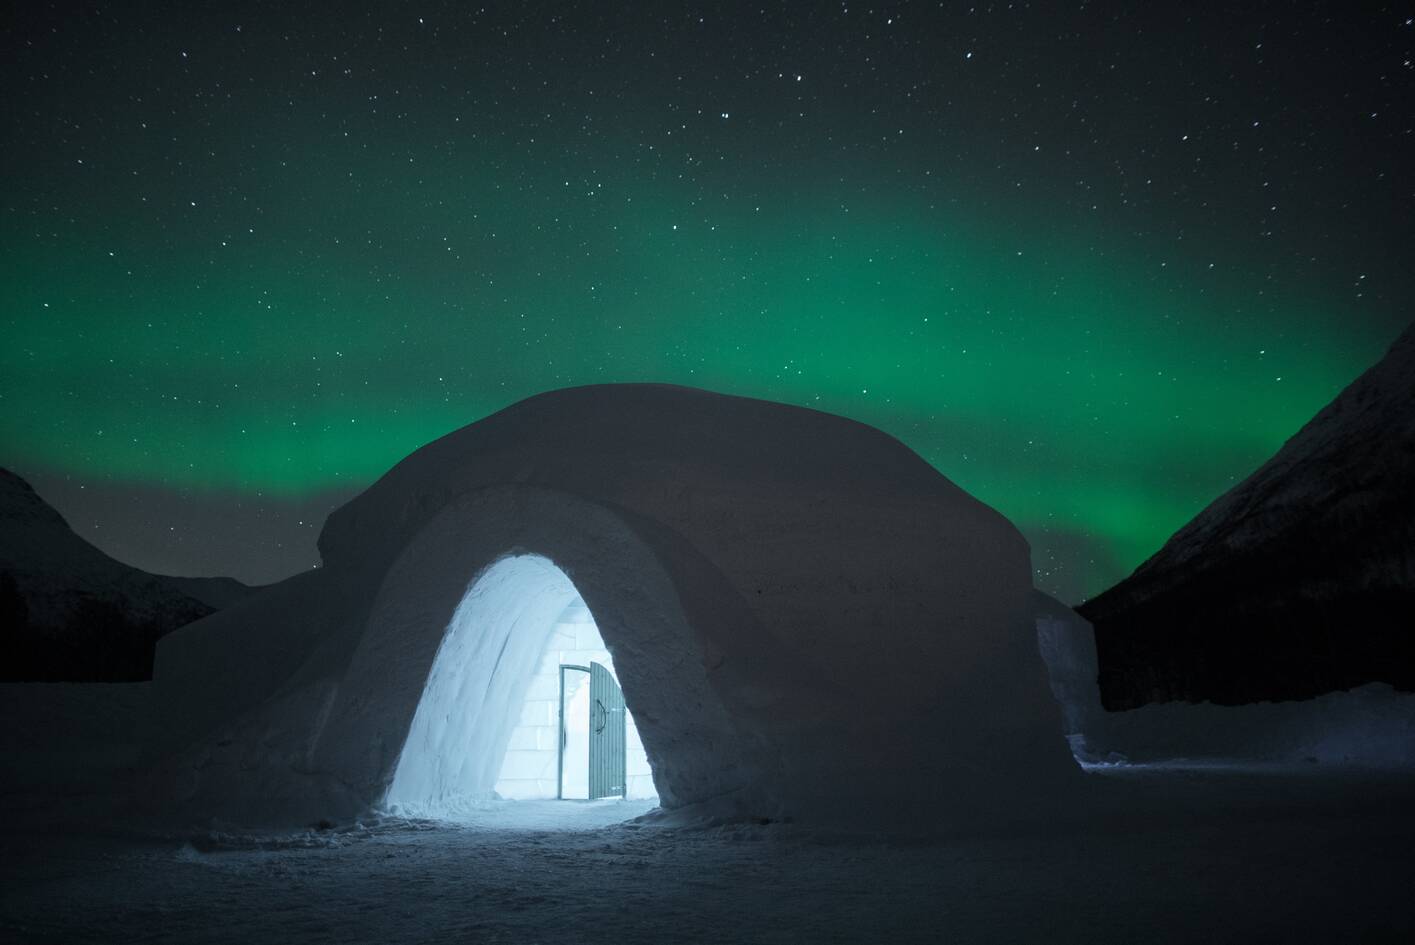 Tromso ice dome, us residents can visit norway now